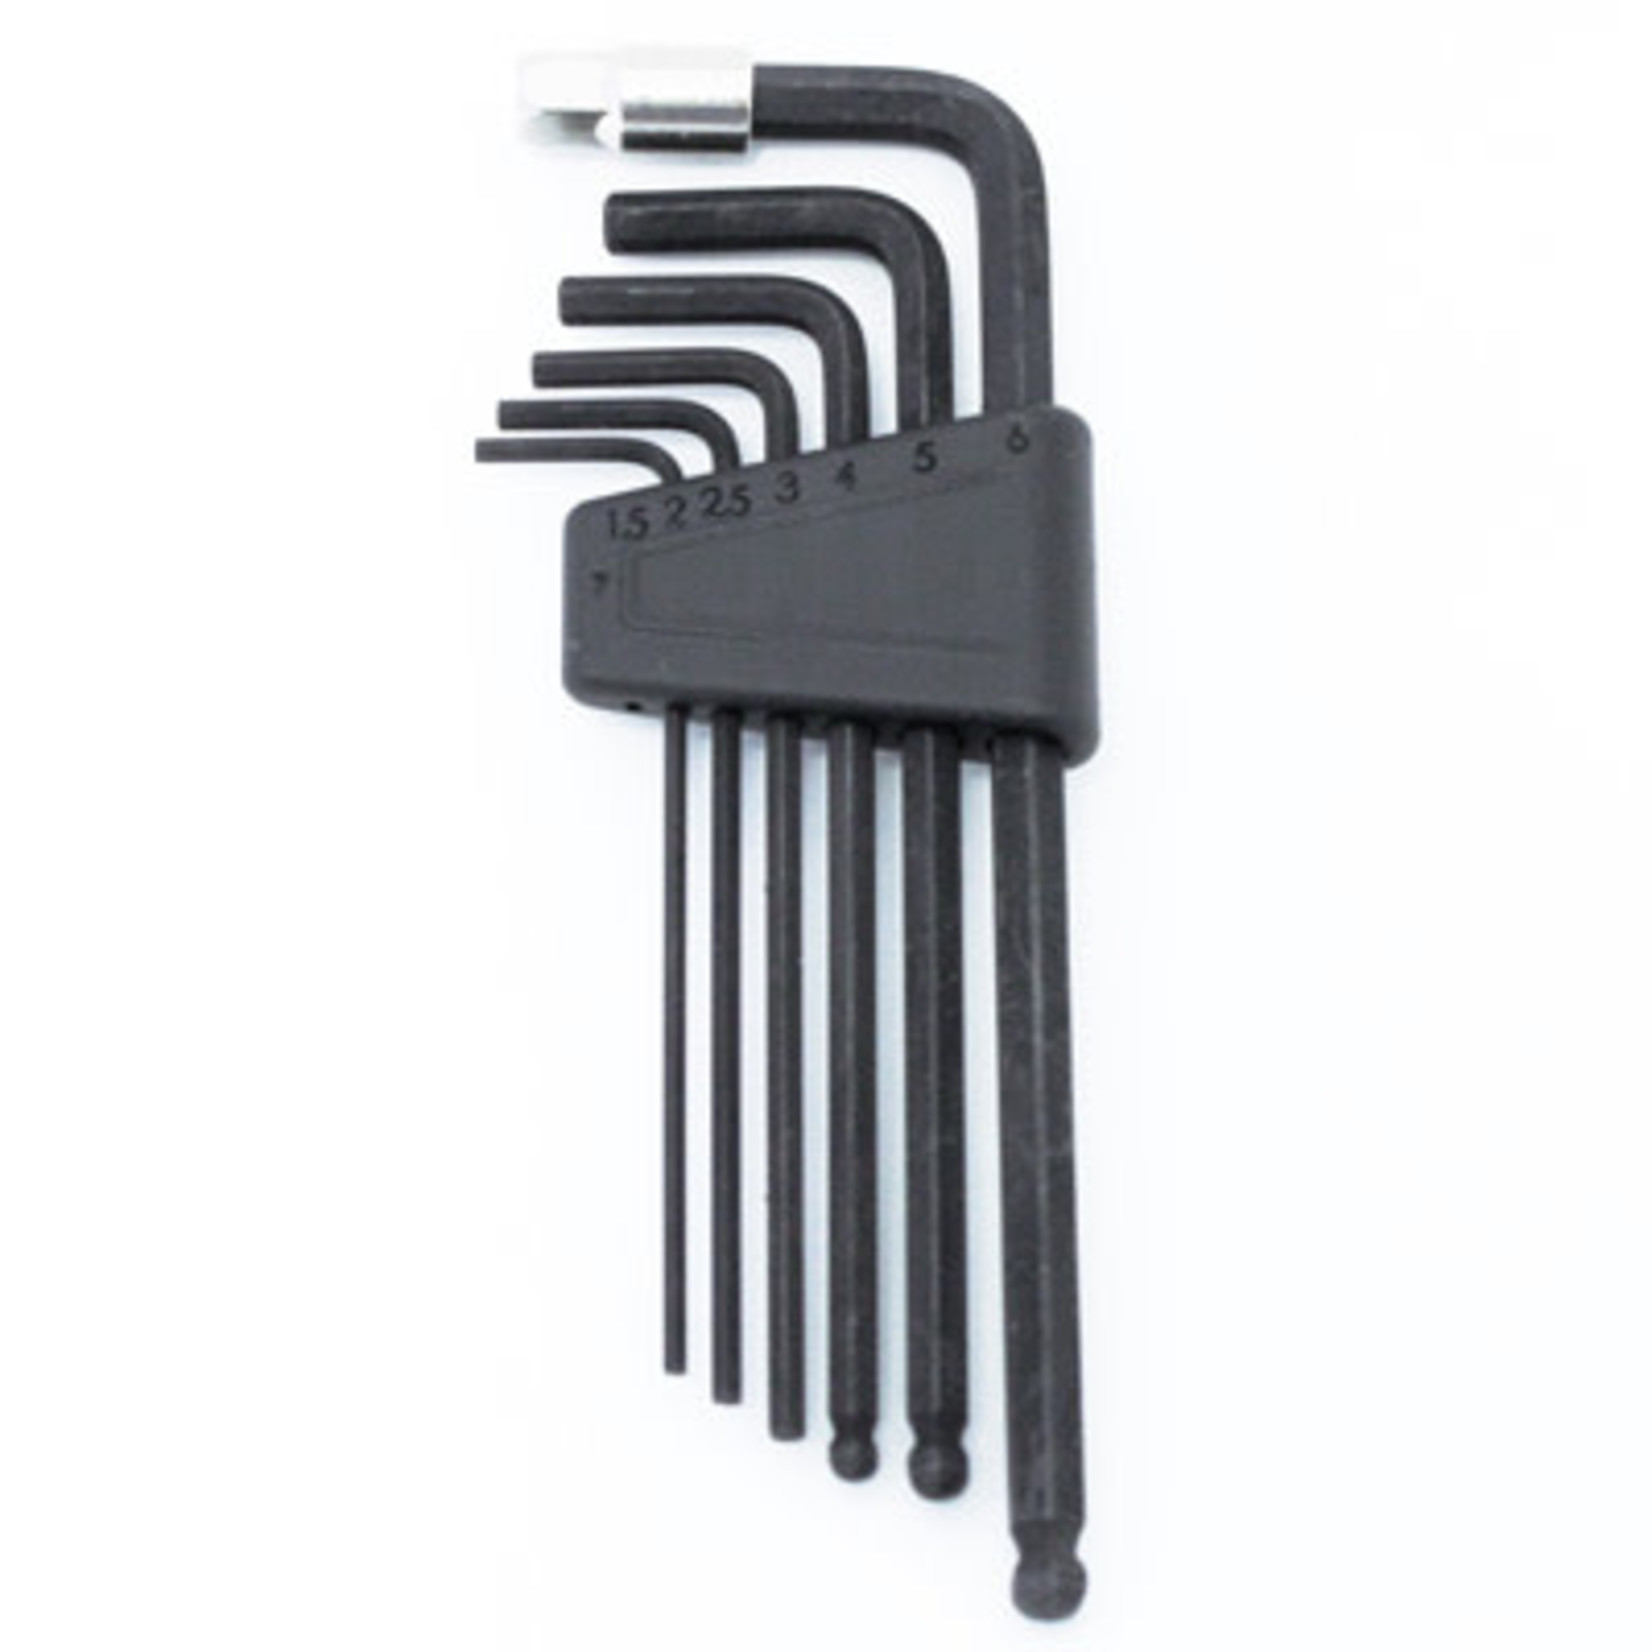 ULTRACYCLE UltraCycle Hex Wrench Set, 2-8mm